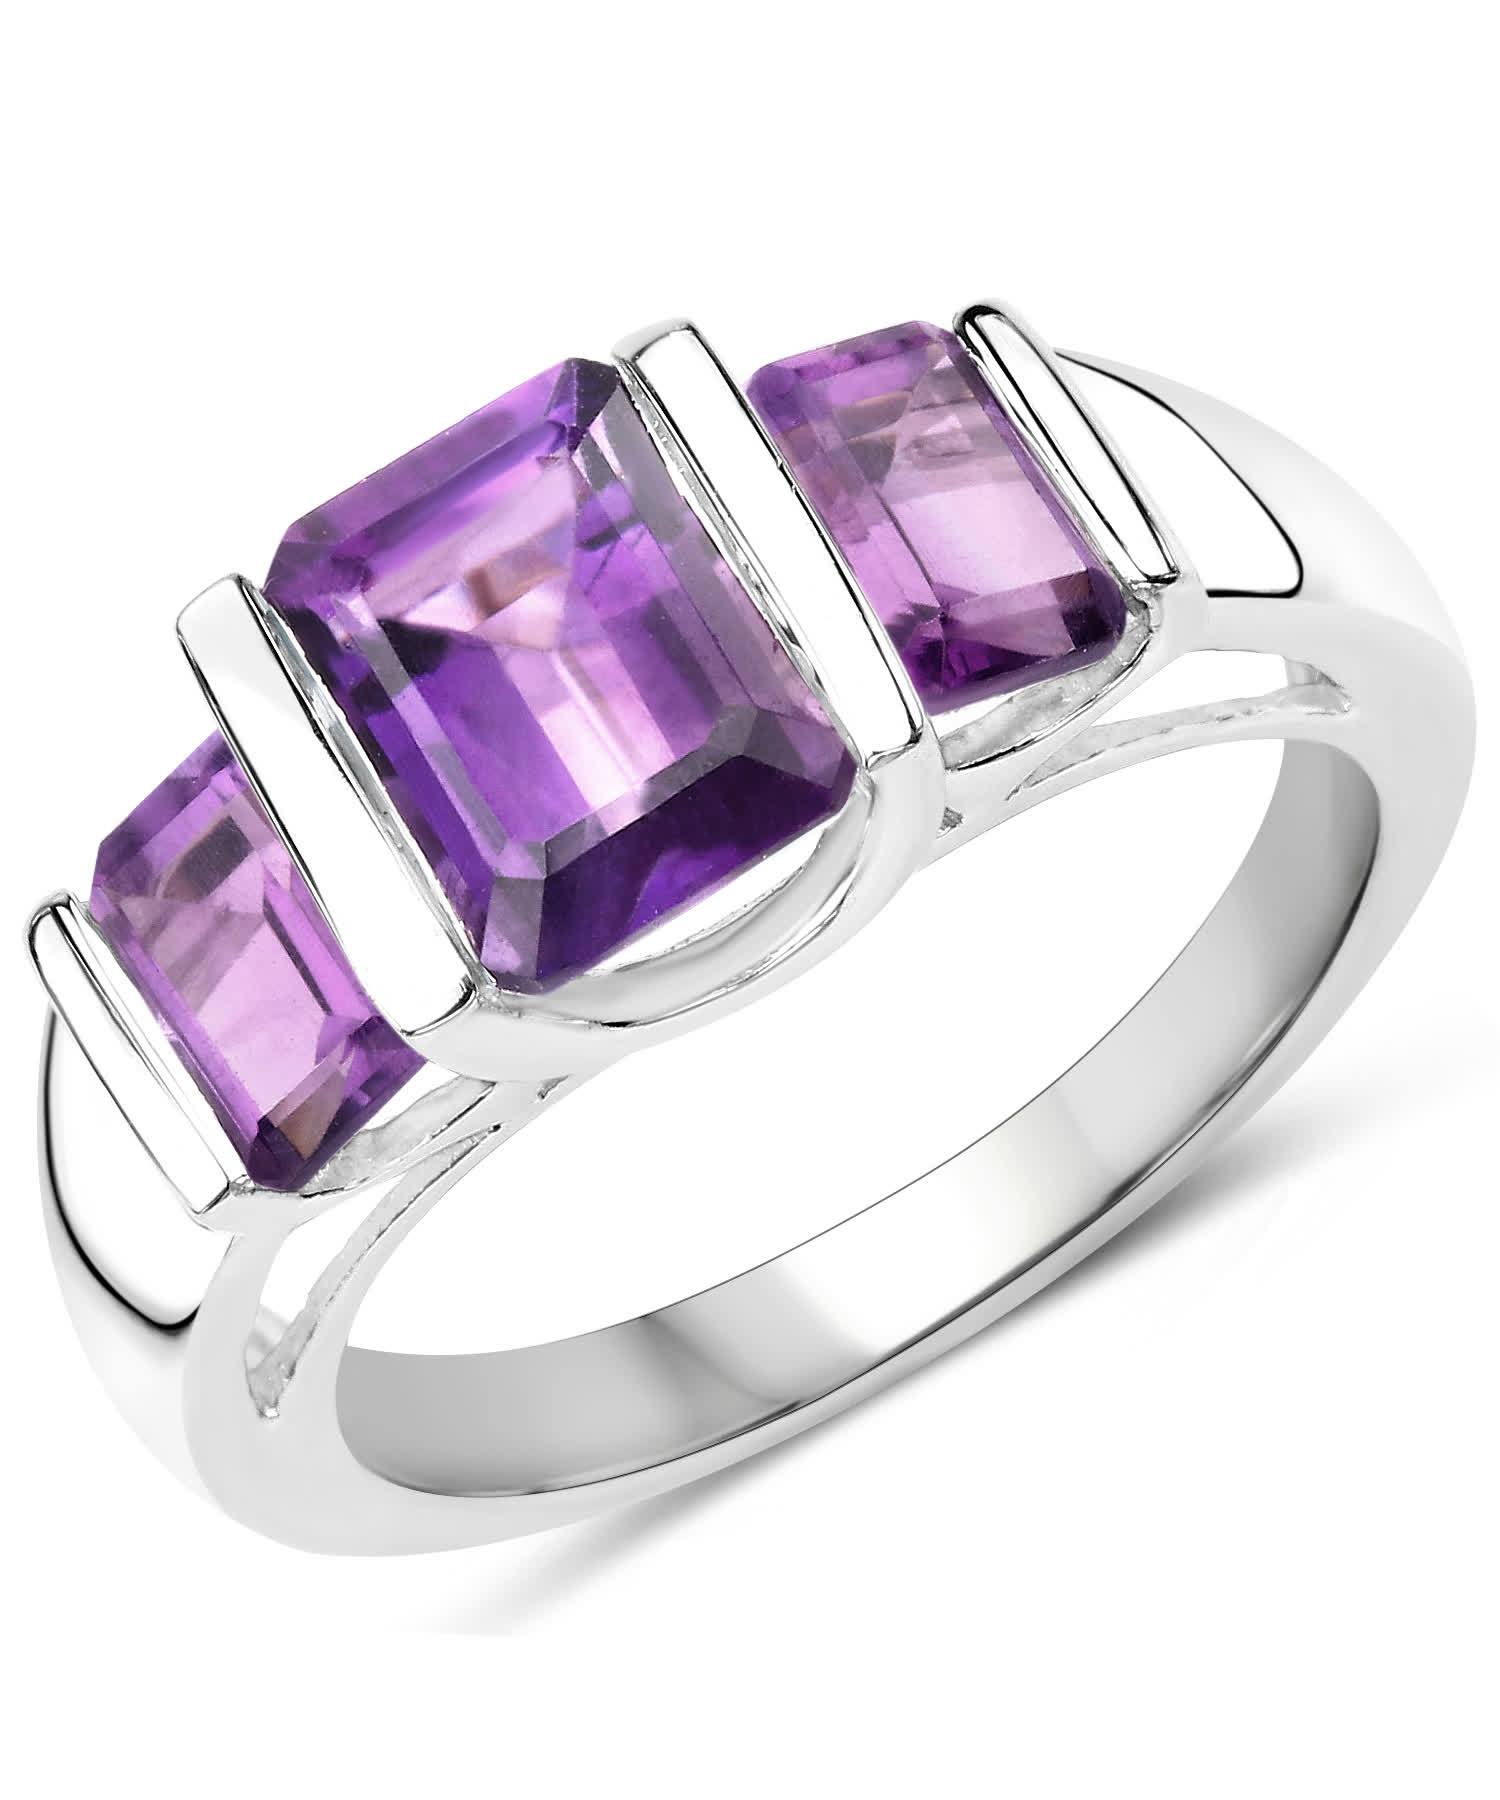 2.70ctw Natural Amethyst Rhodium Plated 925 Sterling Silver Three-Stone Right Hand Ring View 1